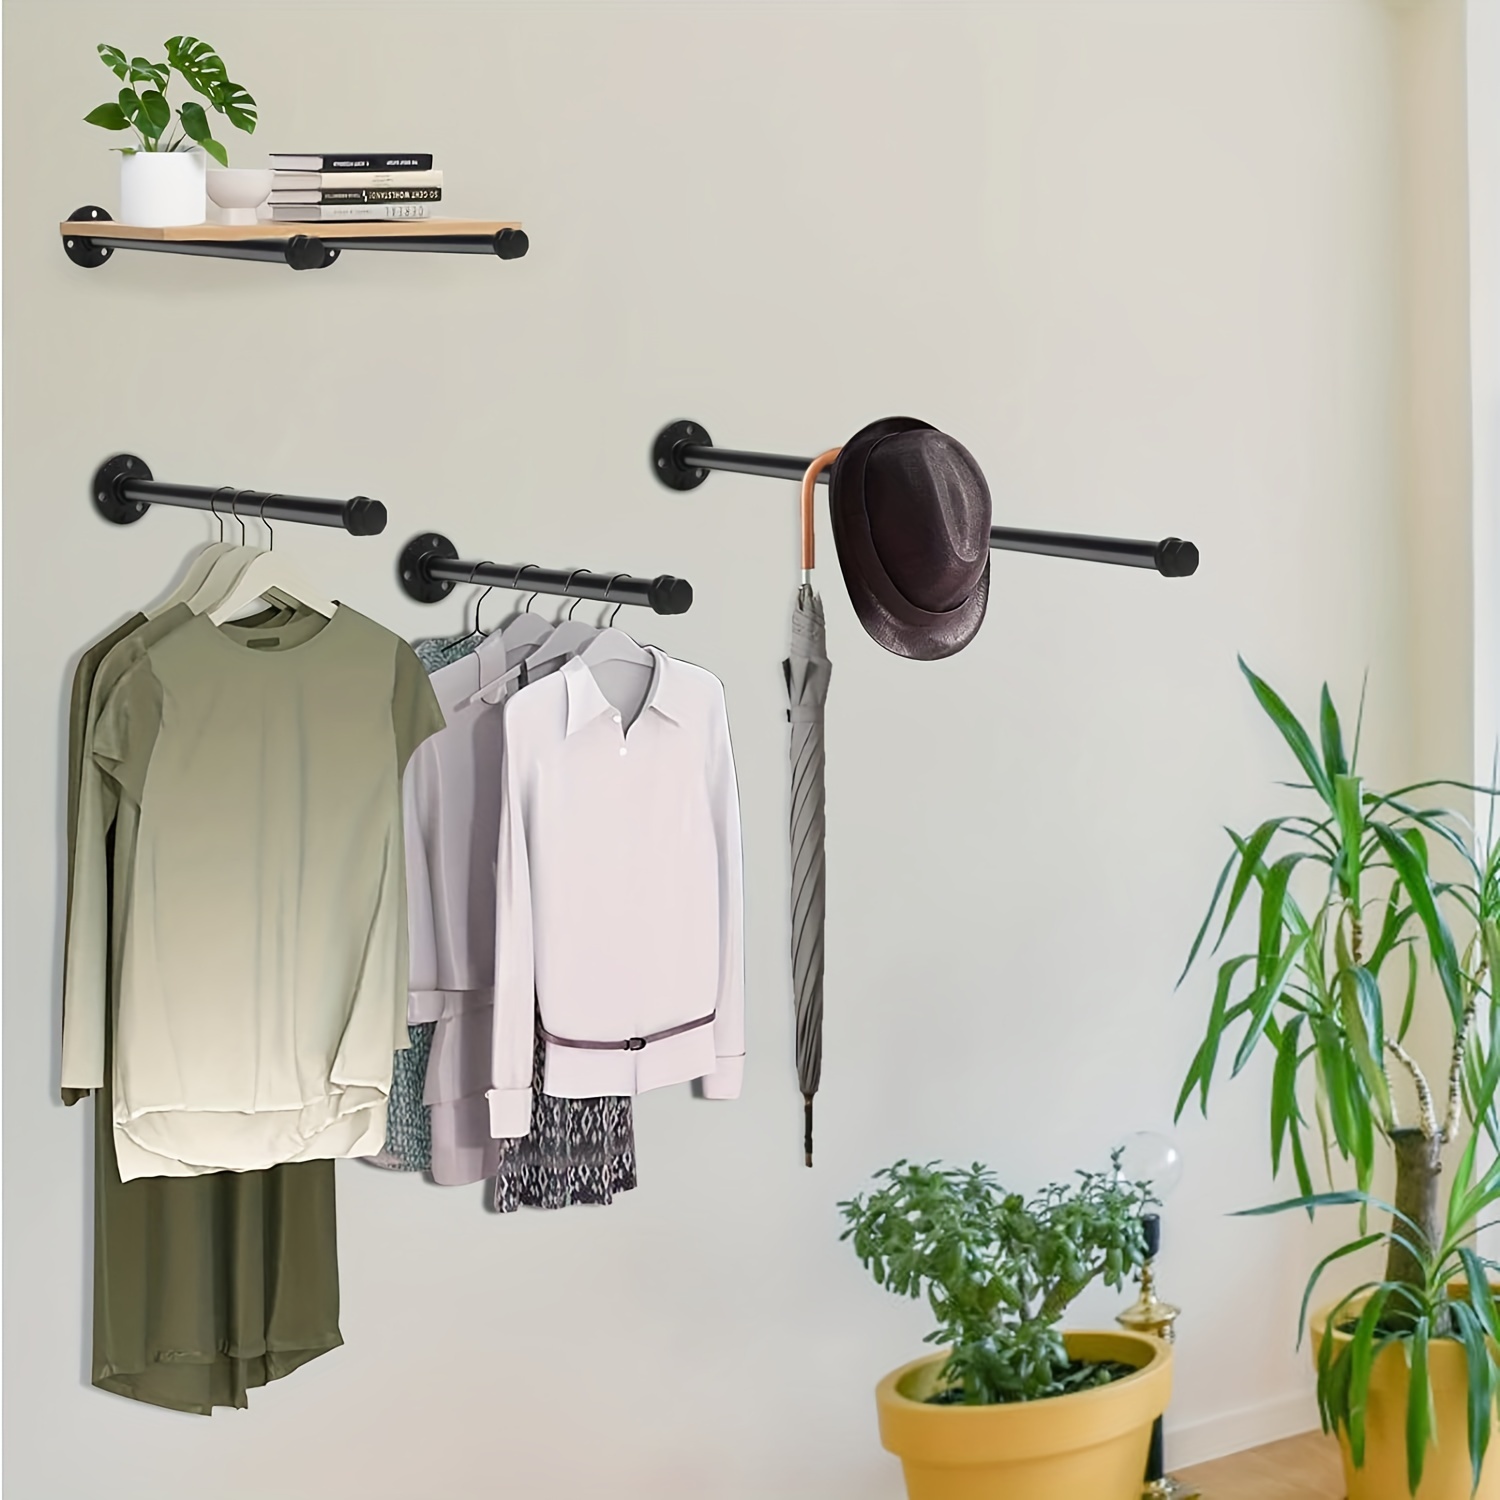 

4pcs Industrial Pipe Clothes Racks, Floating Shelf Brackets, Wall Mounted Garment Rods, Small Hanger For Home And Boutique Clothing Display, Ideal Home Supplies